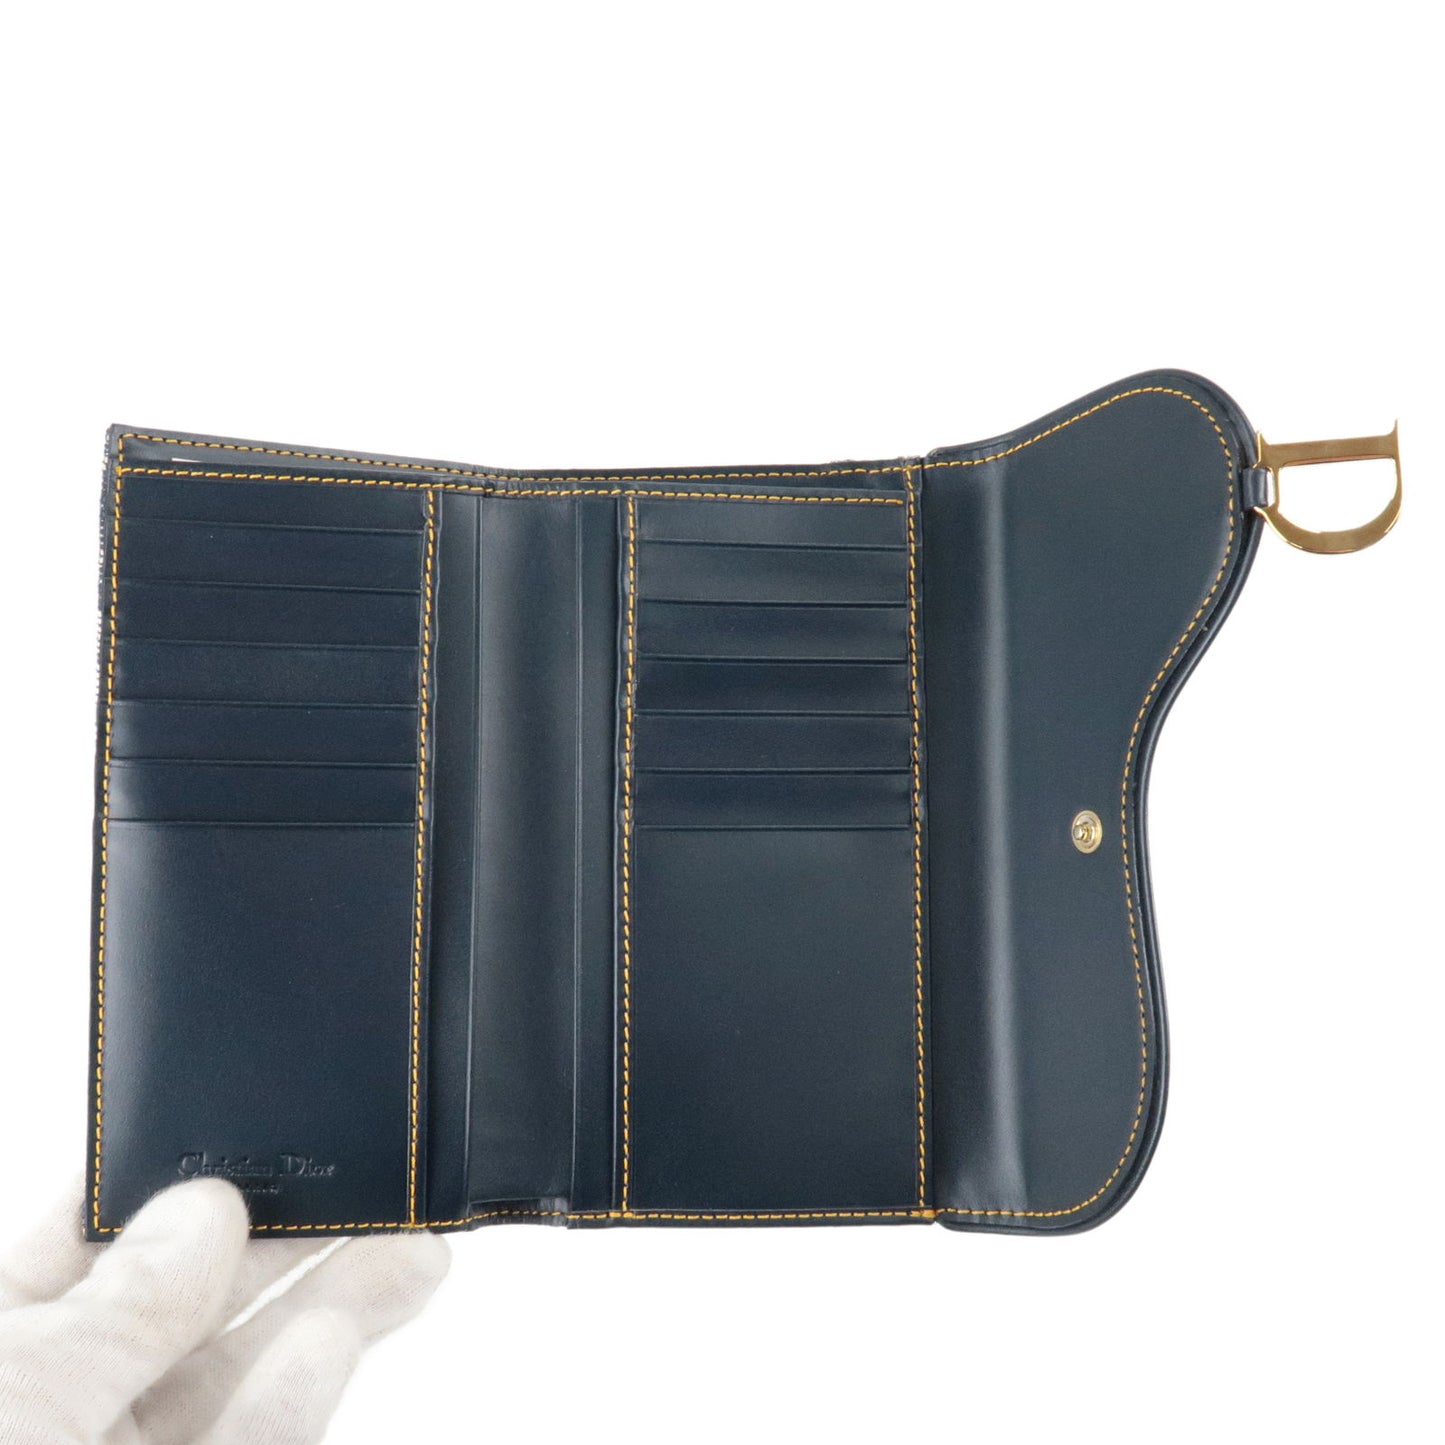 Christian Dior Trotter Canvas Leather Saddle Tri-fold Wallet Navy